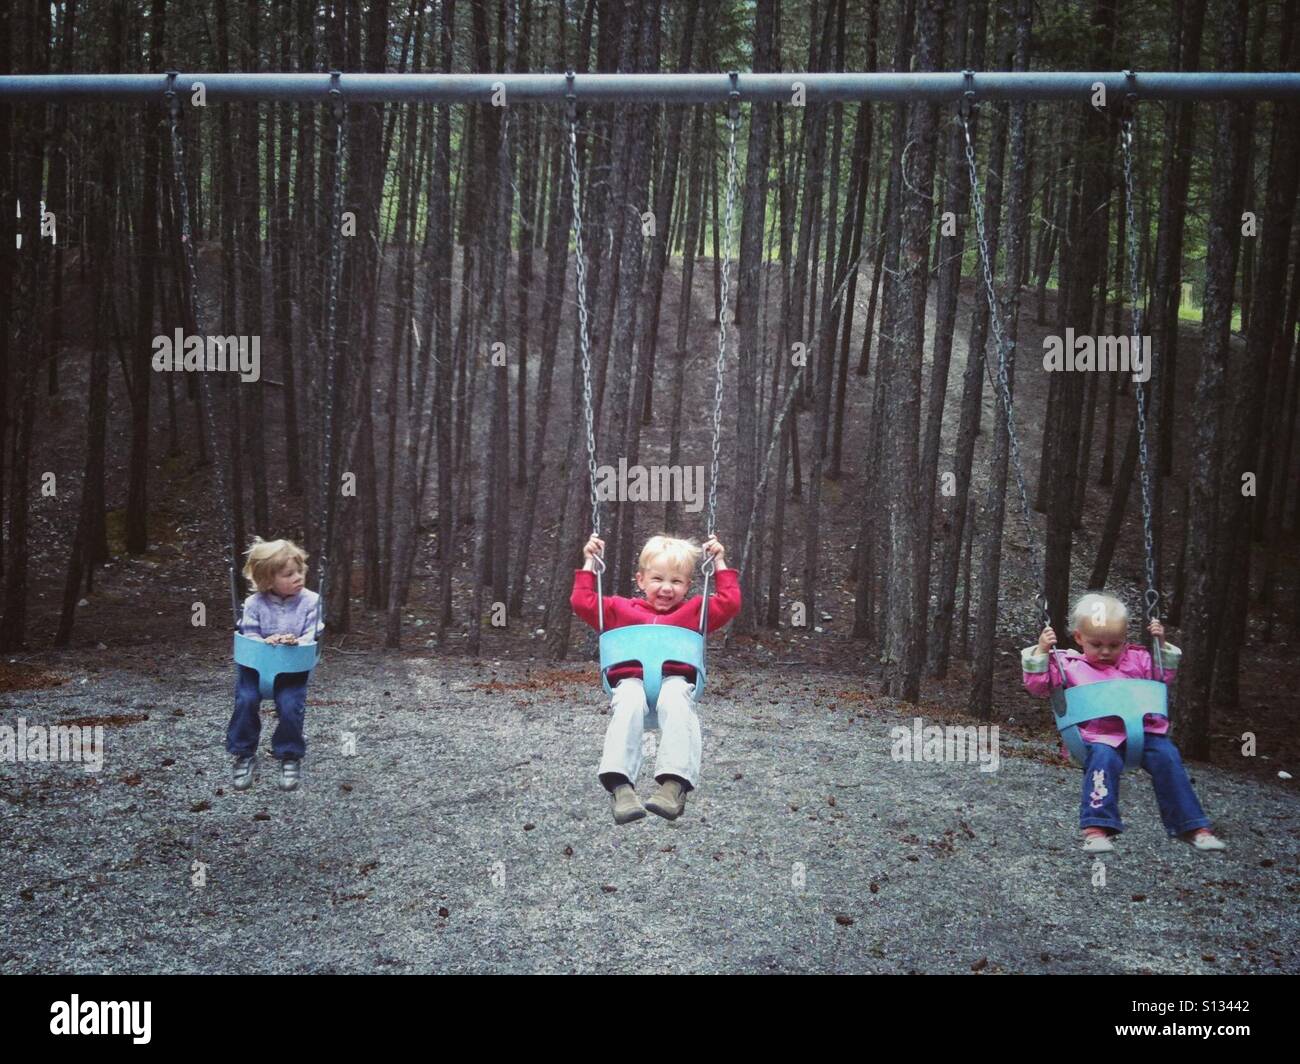 Three children on a swing in a mountain forest. Stock Photo